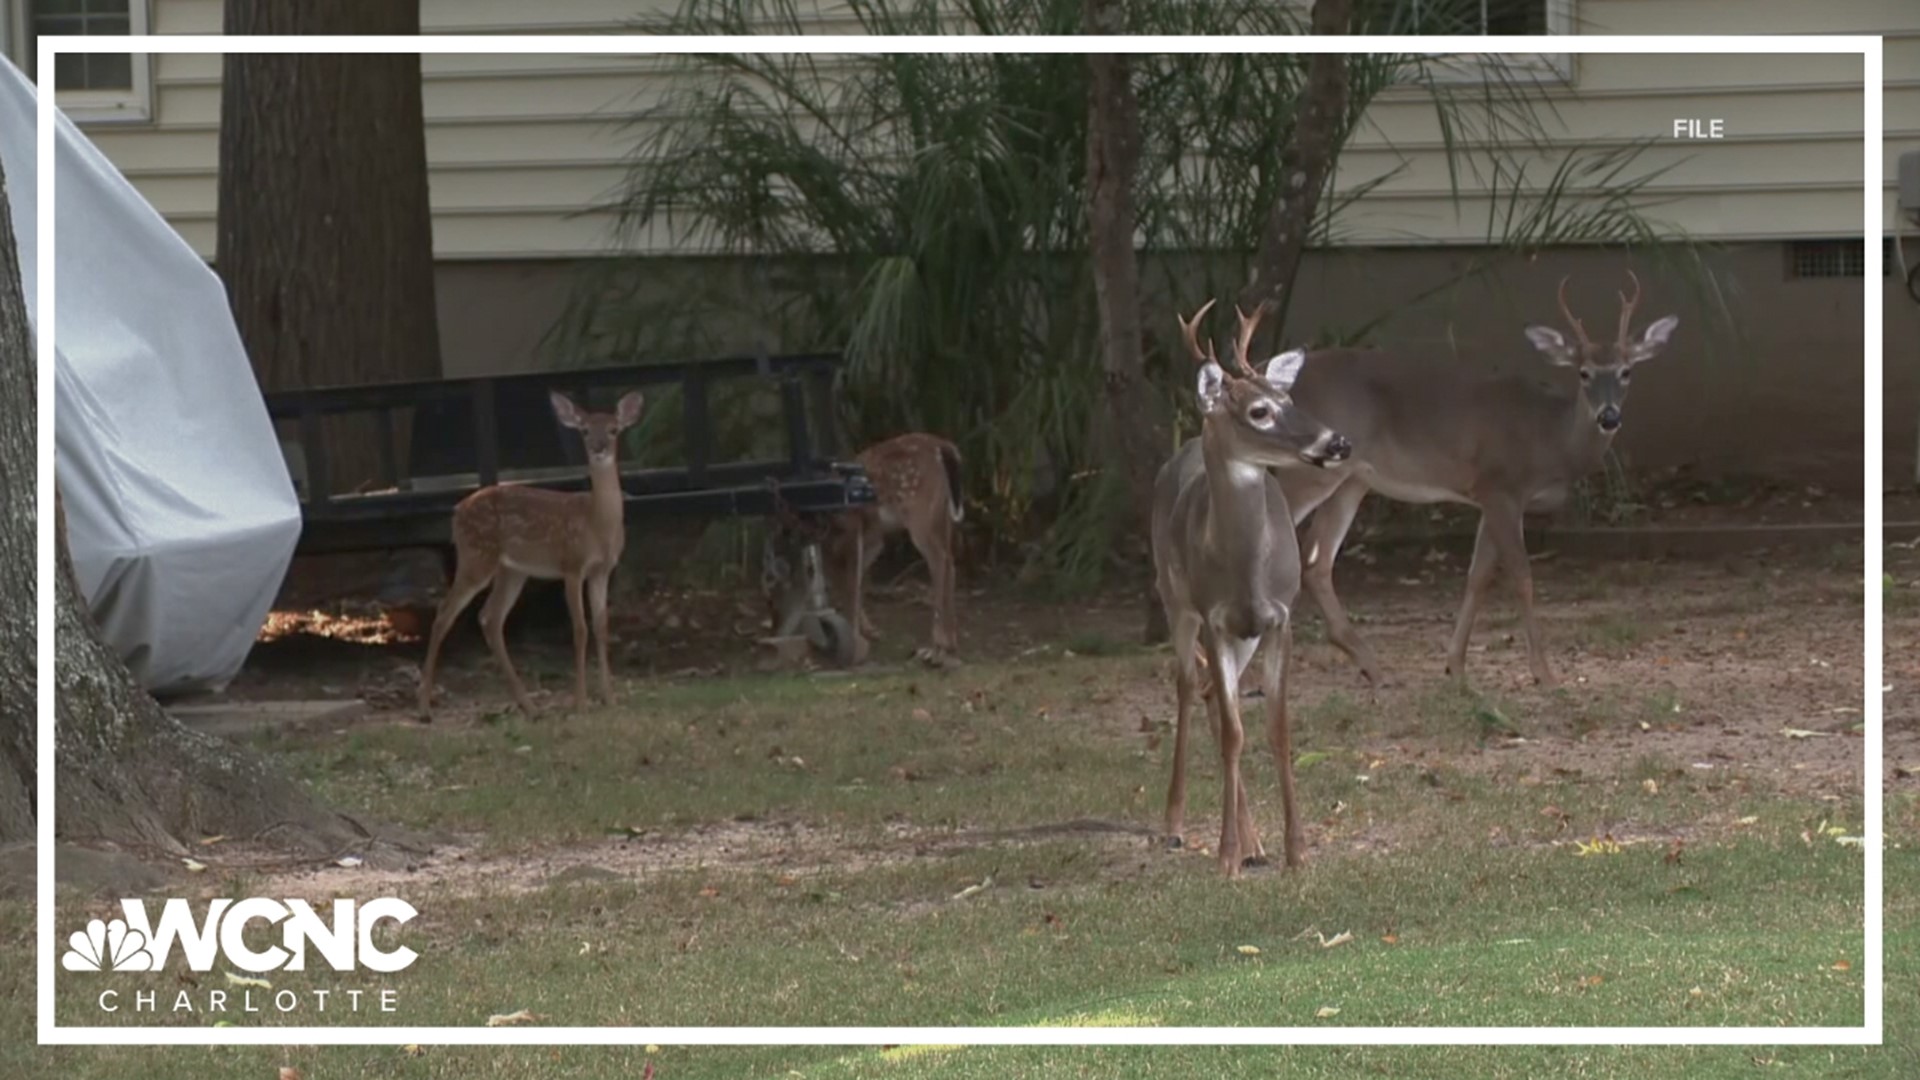 Neighbors say the deer overpopulation problem is getting worse and want to see a plan implemented to thin the herd as soon as possible.